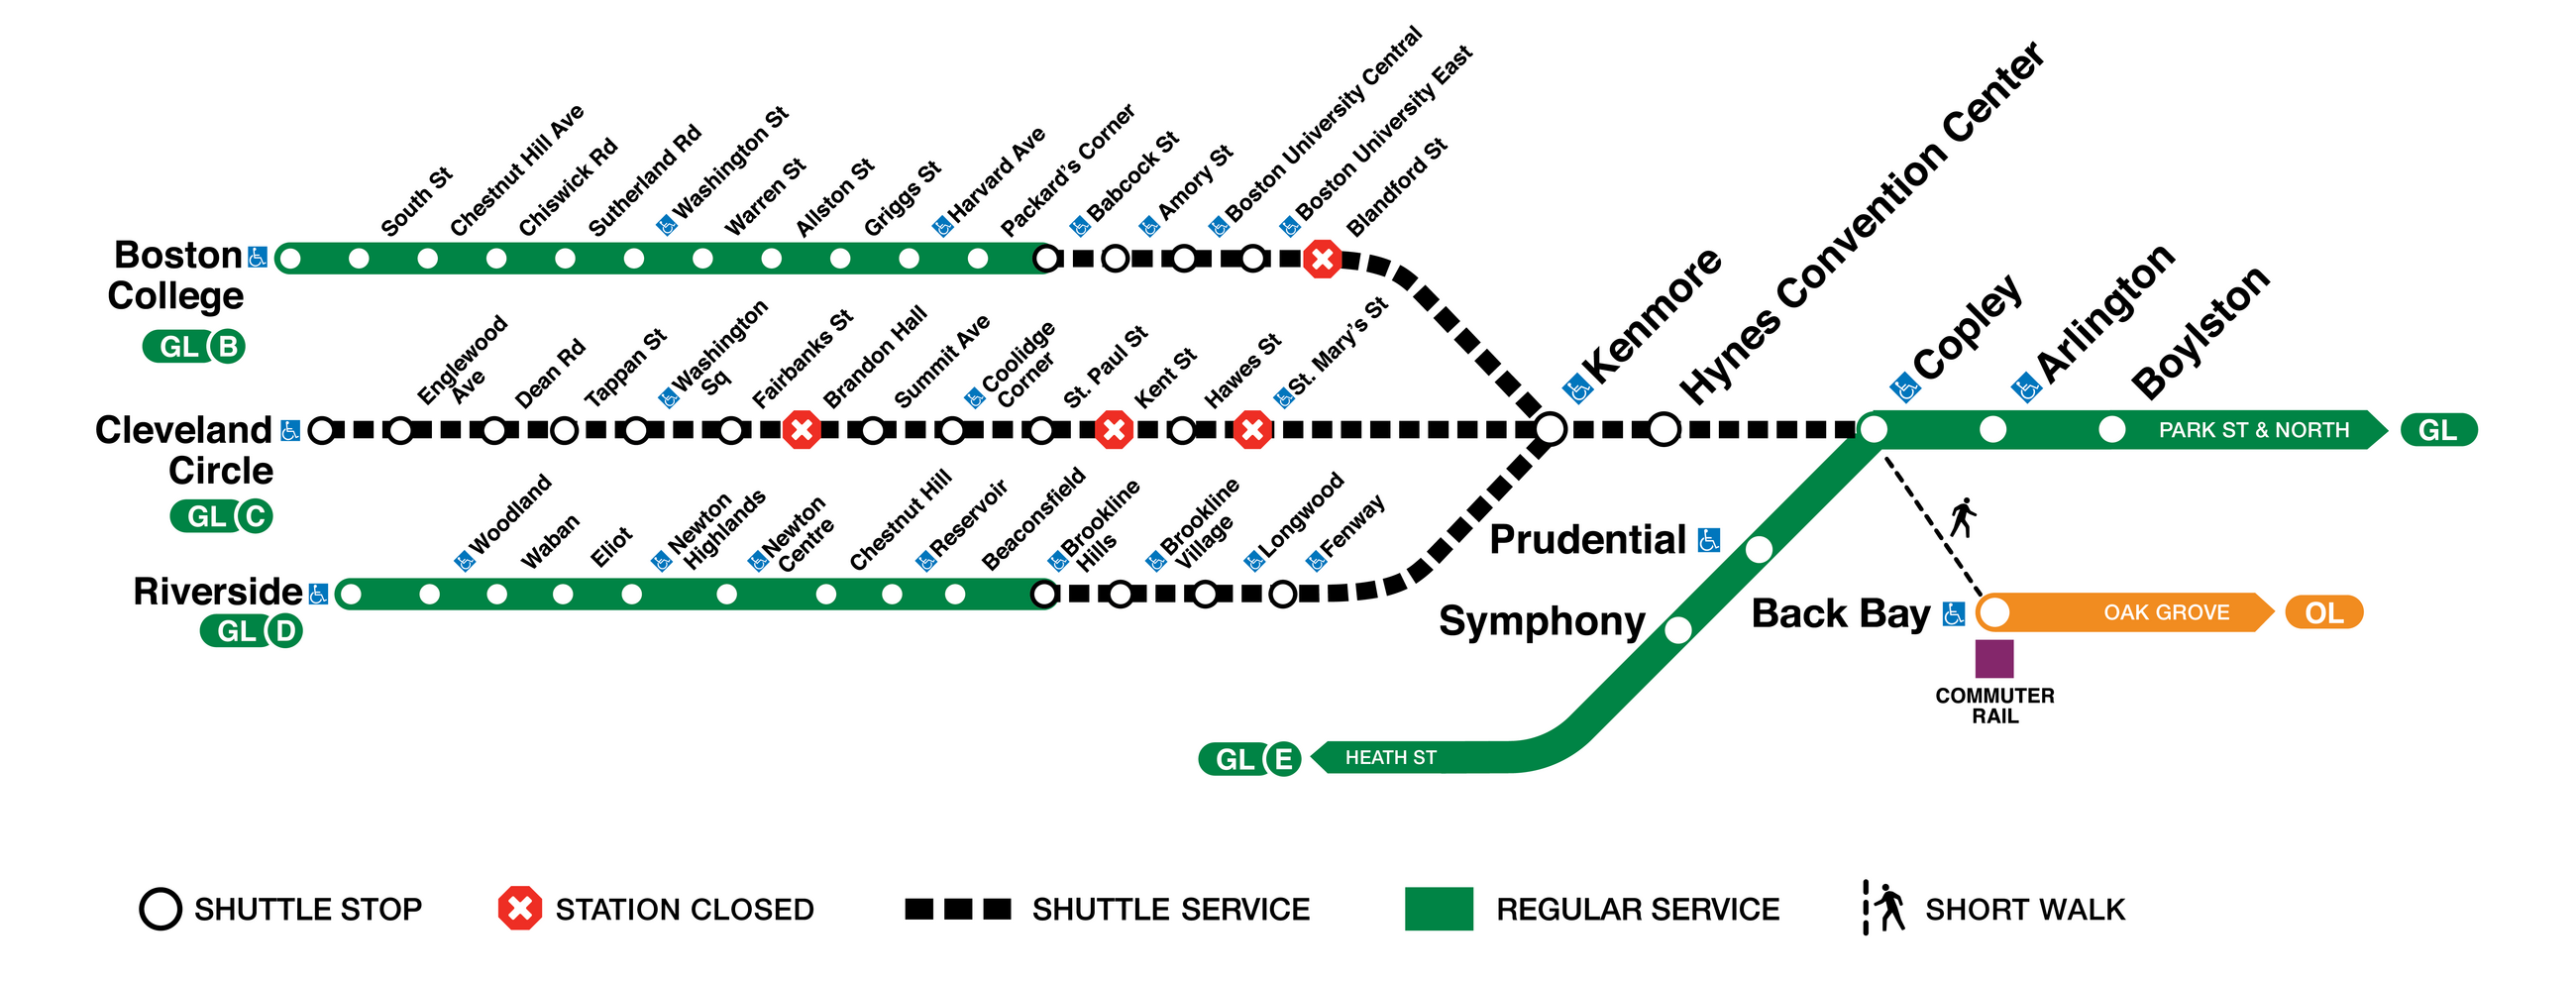 Shuttle buses and alternatives during the Green Line suspension from Feb 20 to March 8.